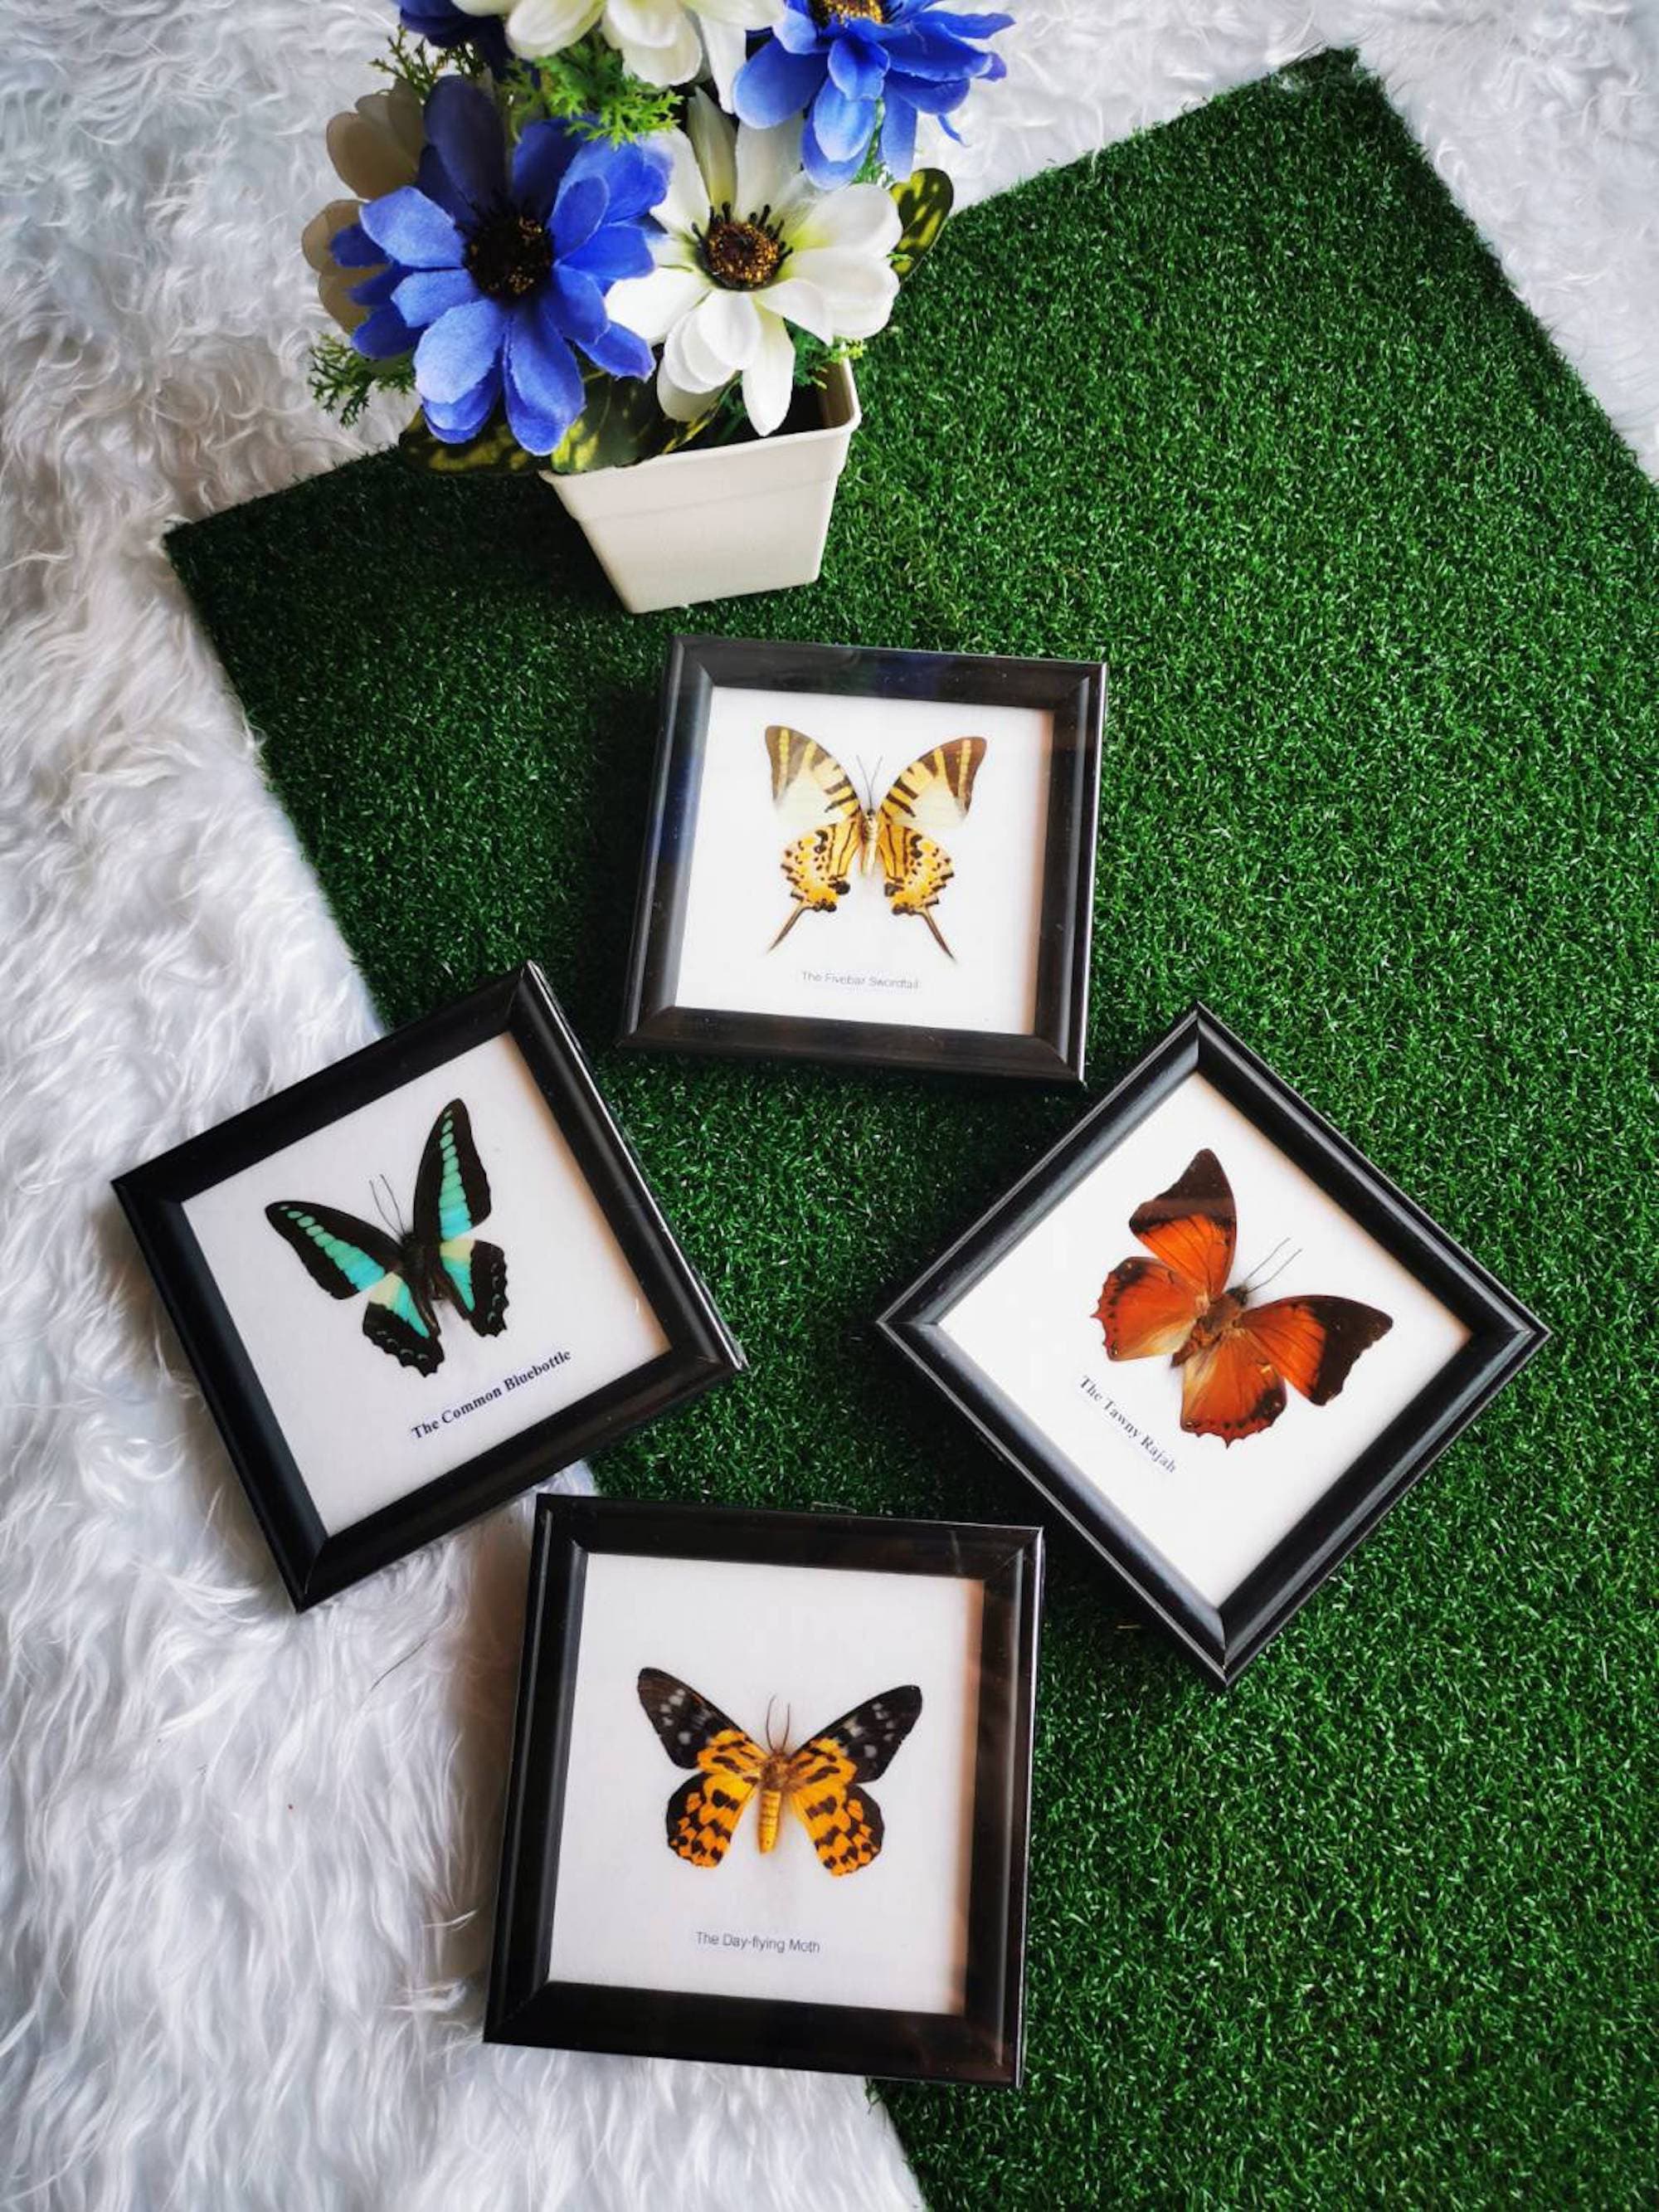 Real Common Bluebottle Butterfly Insect Taxidermy Mounted 5x5 Framed Display 